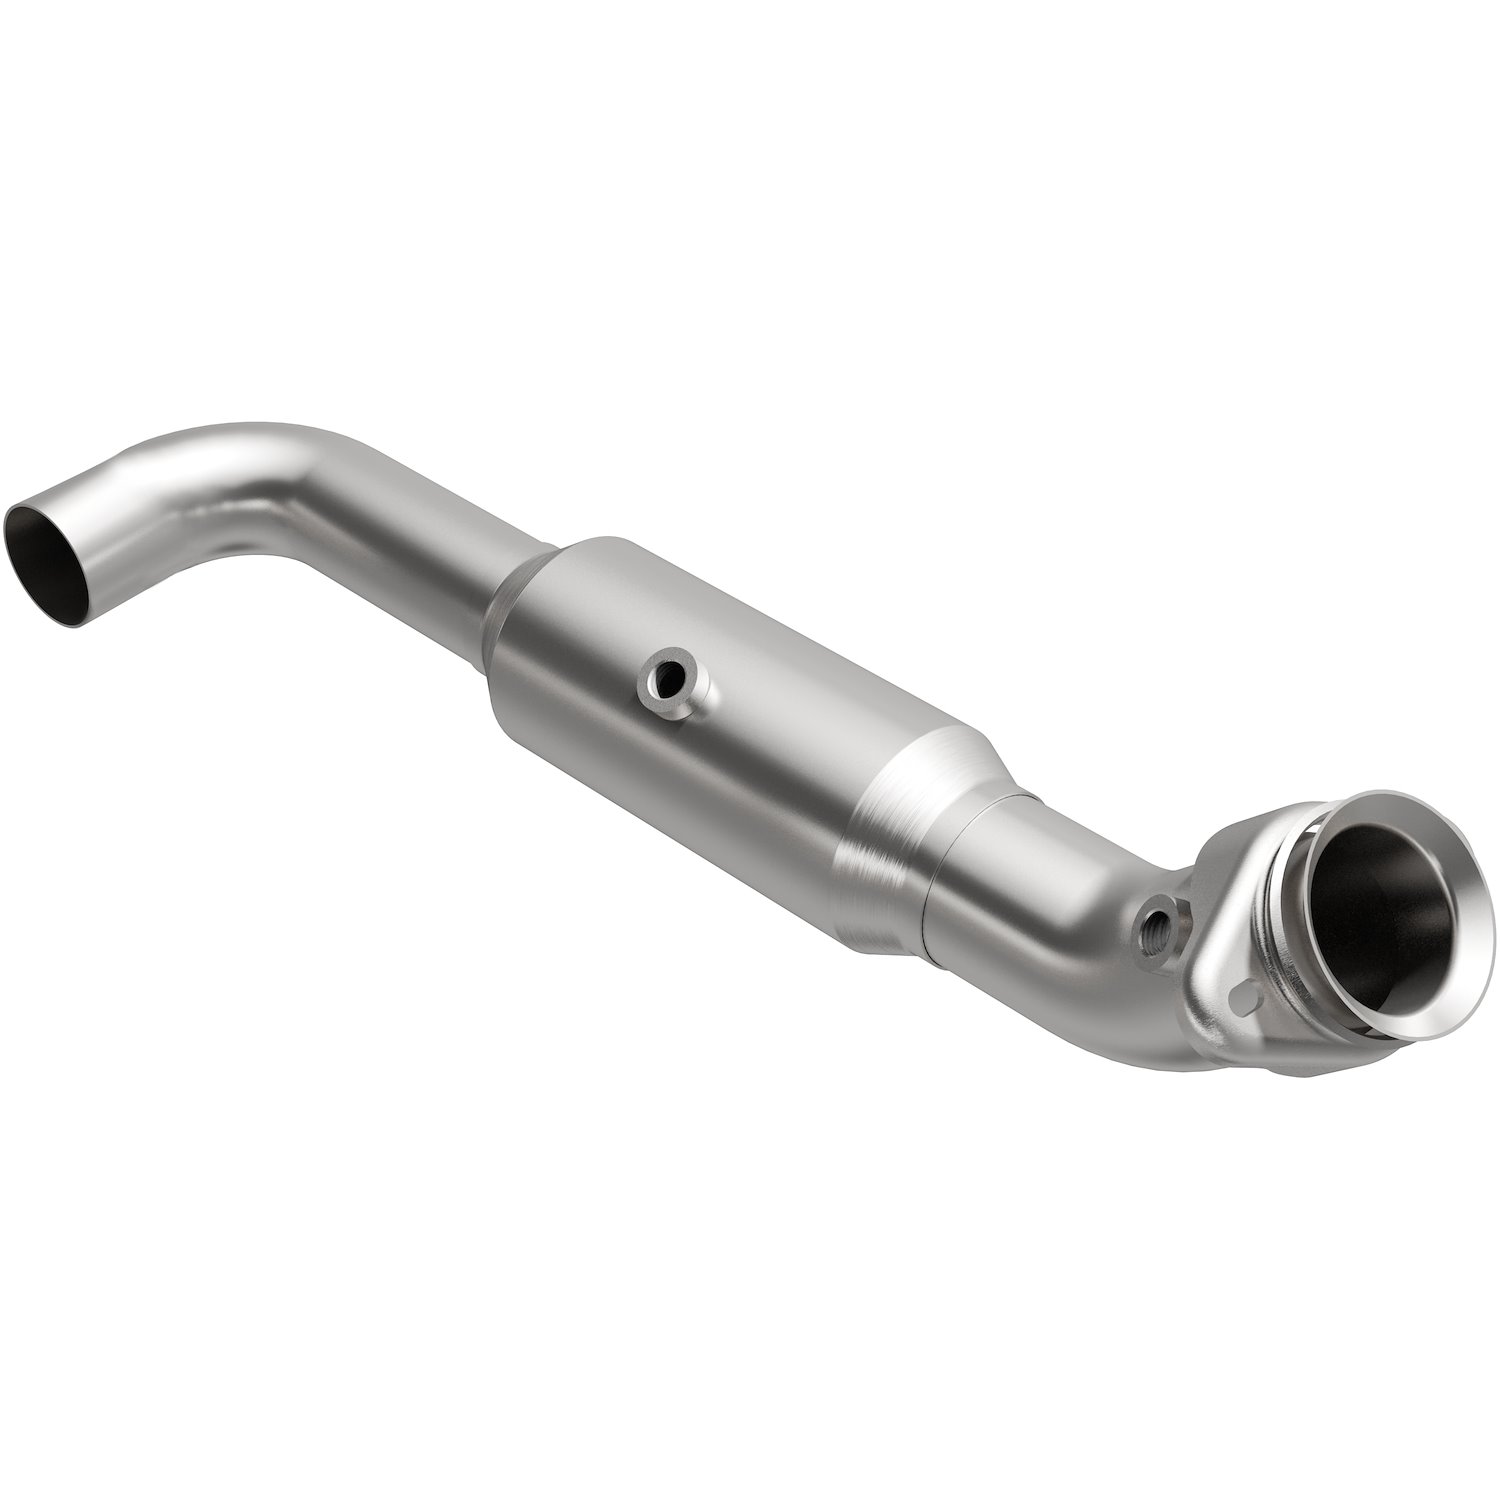 2010-2014 Ford F-150 California Grade CARB Compliant Direct-Fit Catalytic Converter